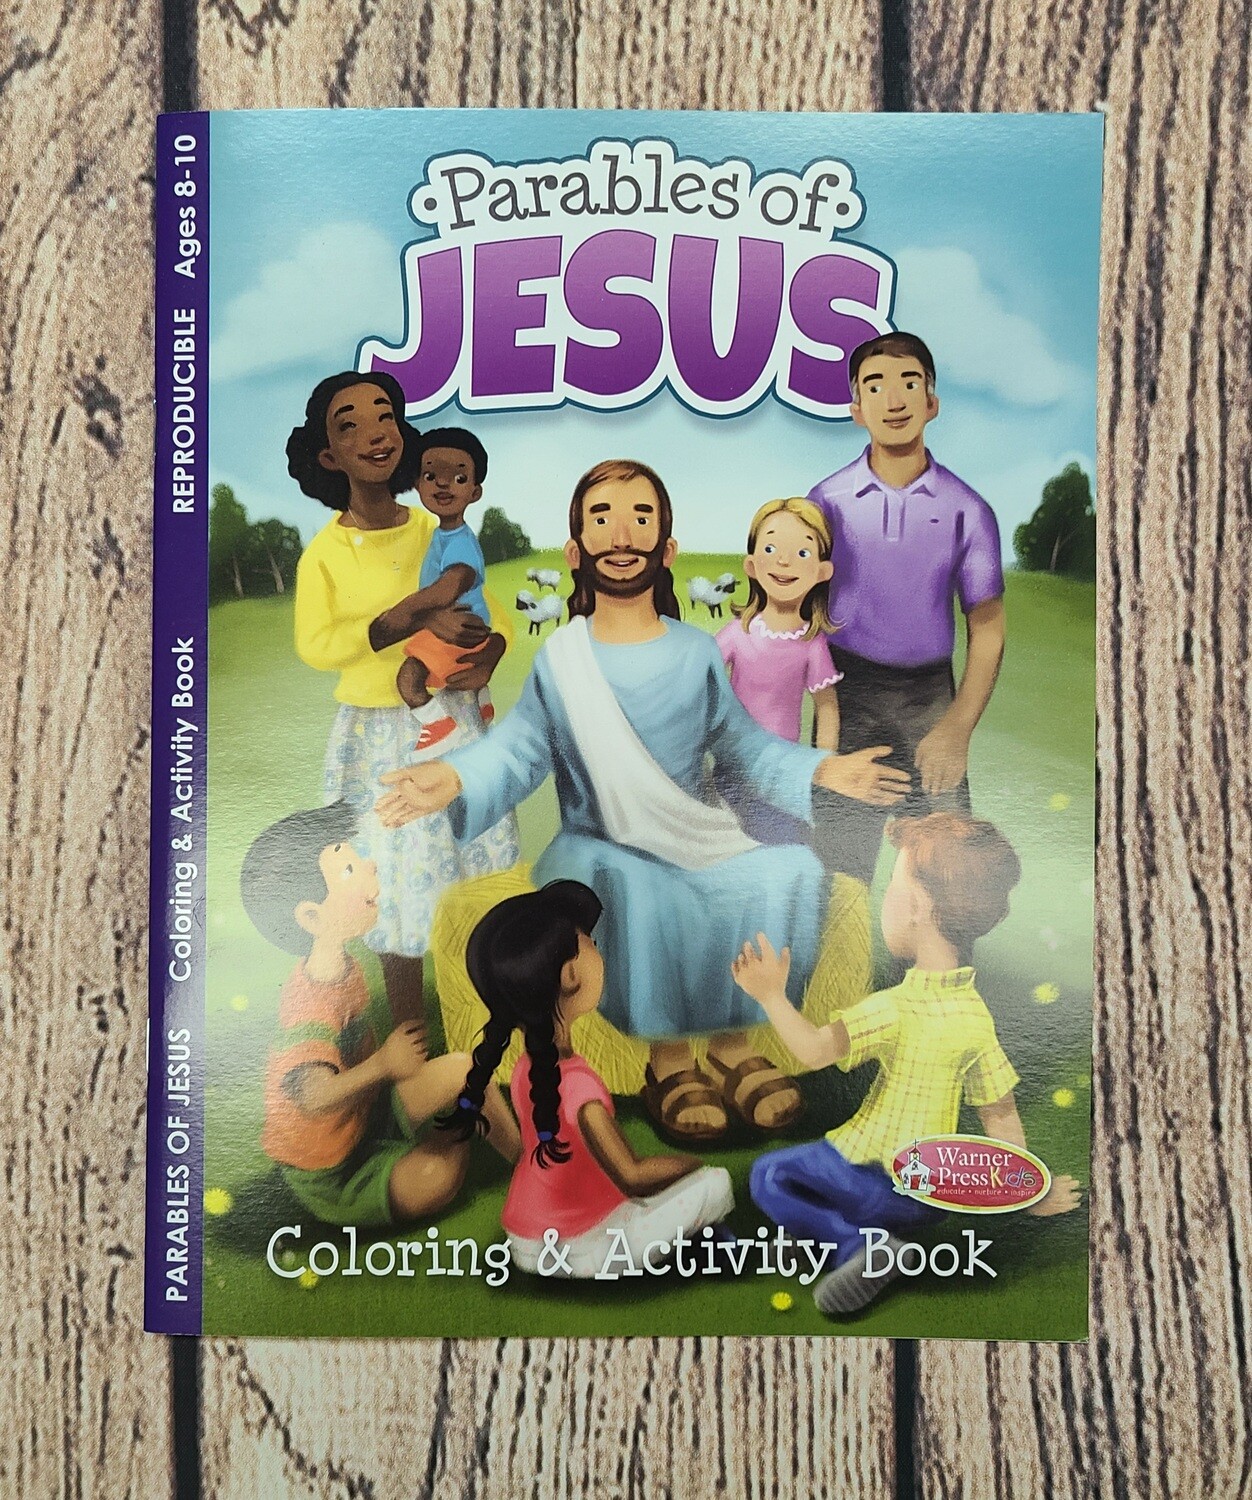 Parables of Jesus Coloring and Activity Book for Kids